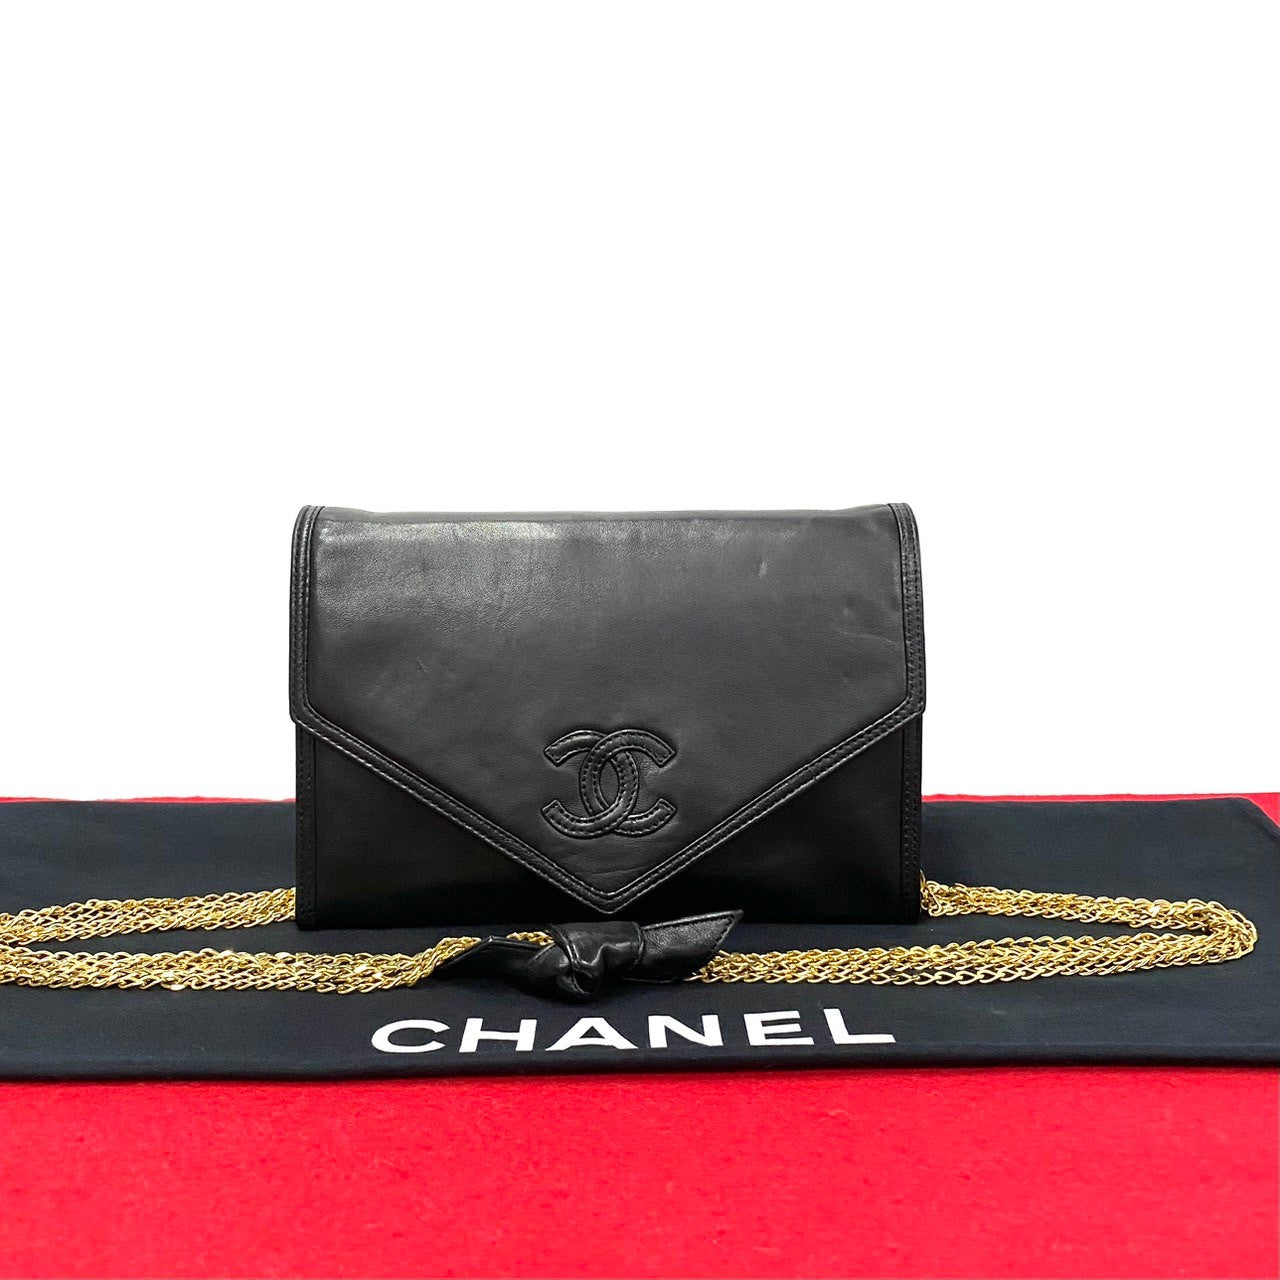 Chanel Coco Lambskin Chain Mini Shoulder Bag Leather Shoulder Bag 07694 in Good condition